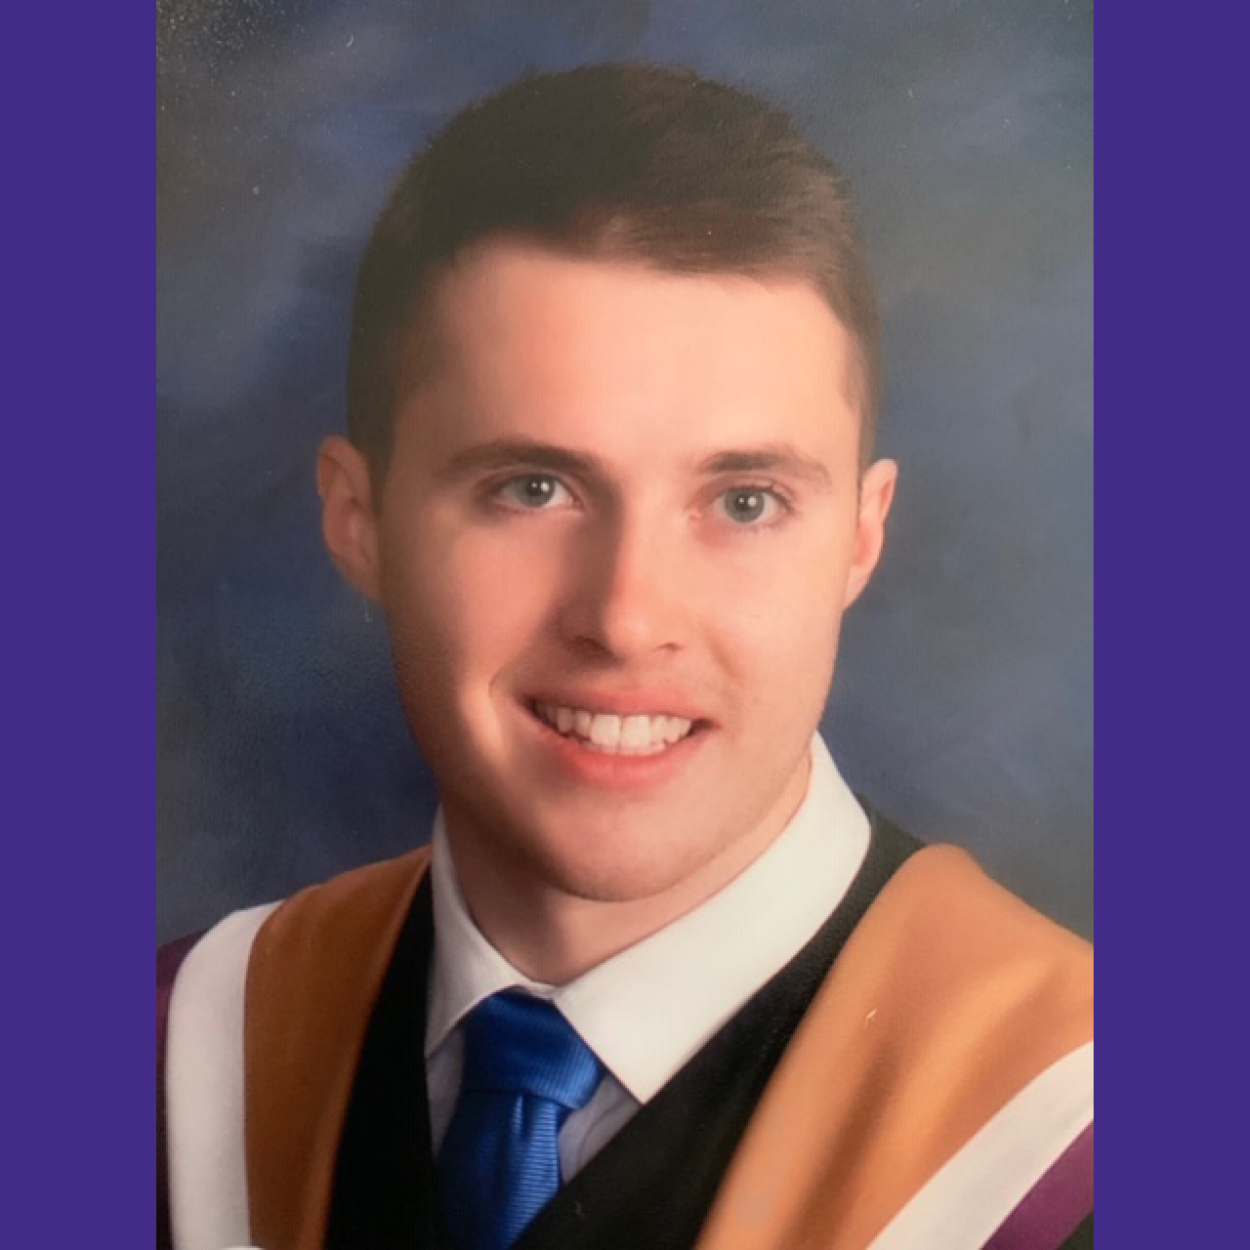 Spotlight story image pertaining to Graduation portrait of Braden Story smiling at the camera and wearing Laurier convocation robes